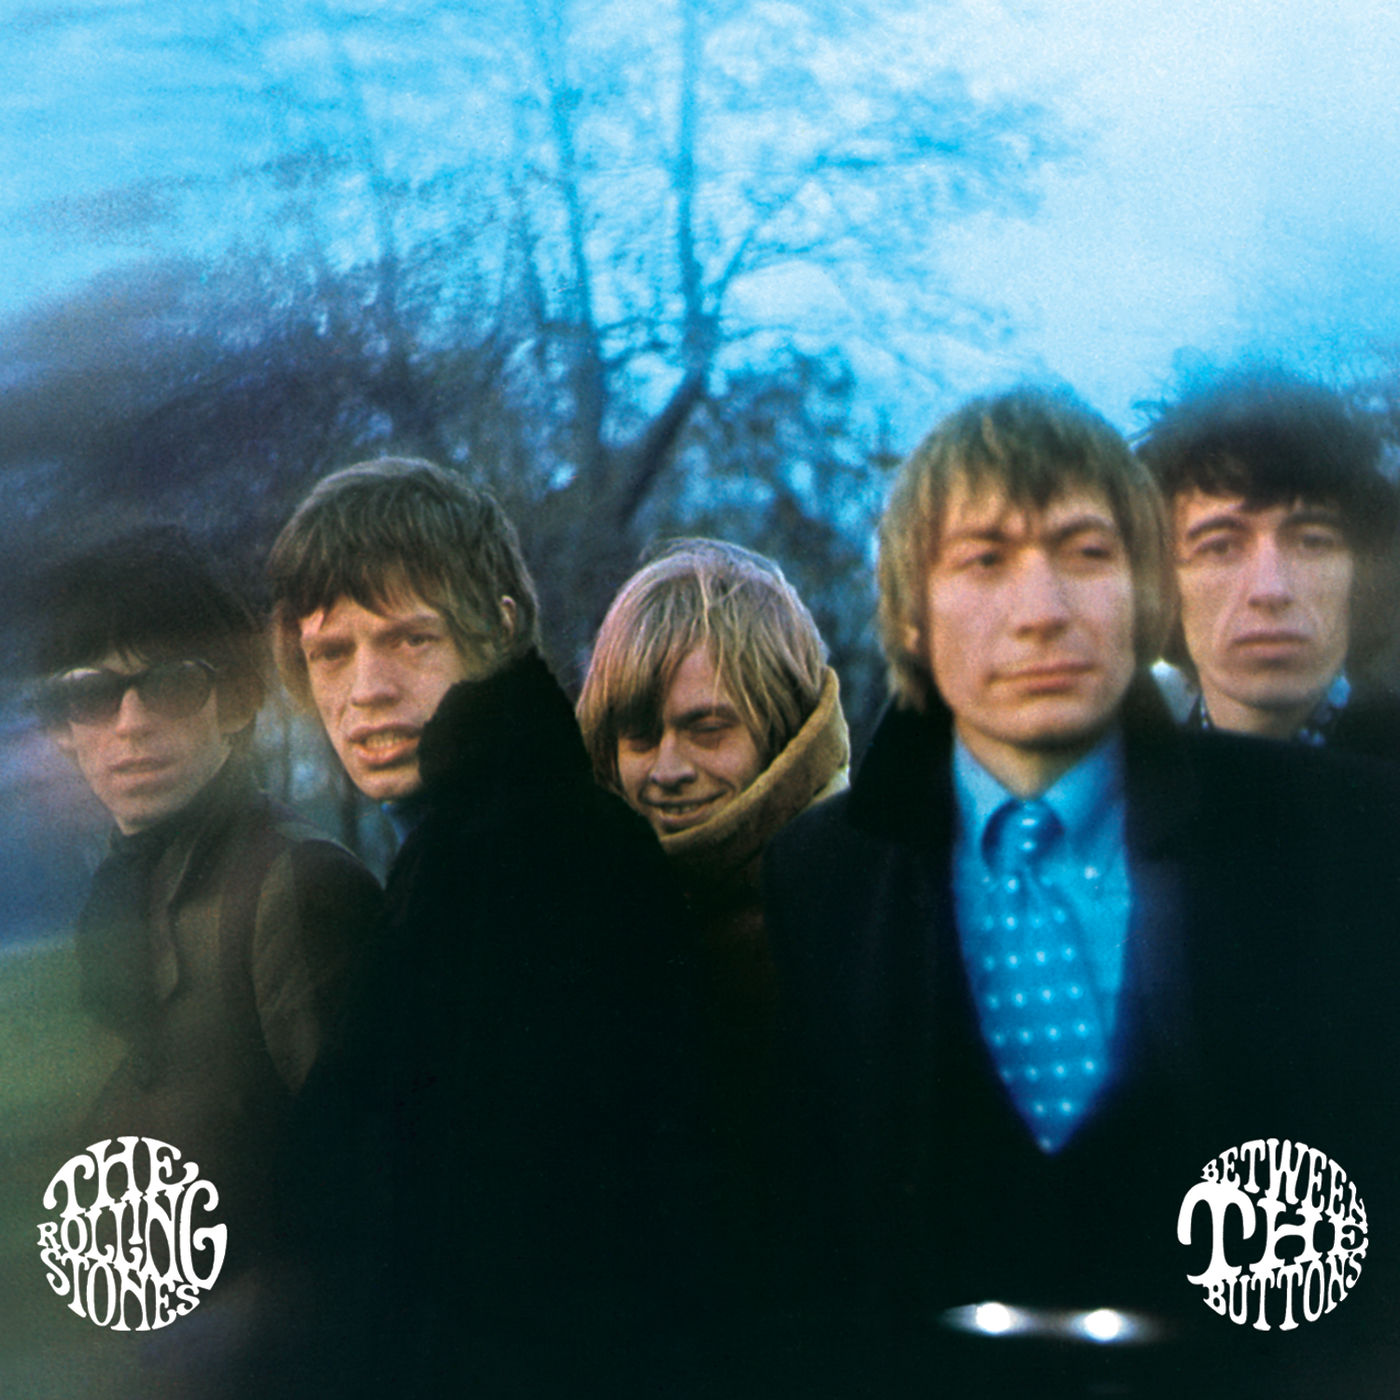 The Rolling Stones - Between The Buttons (UK Version) (1967/2002/2014) [FLAC 24bit/176,4kHz]